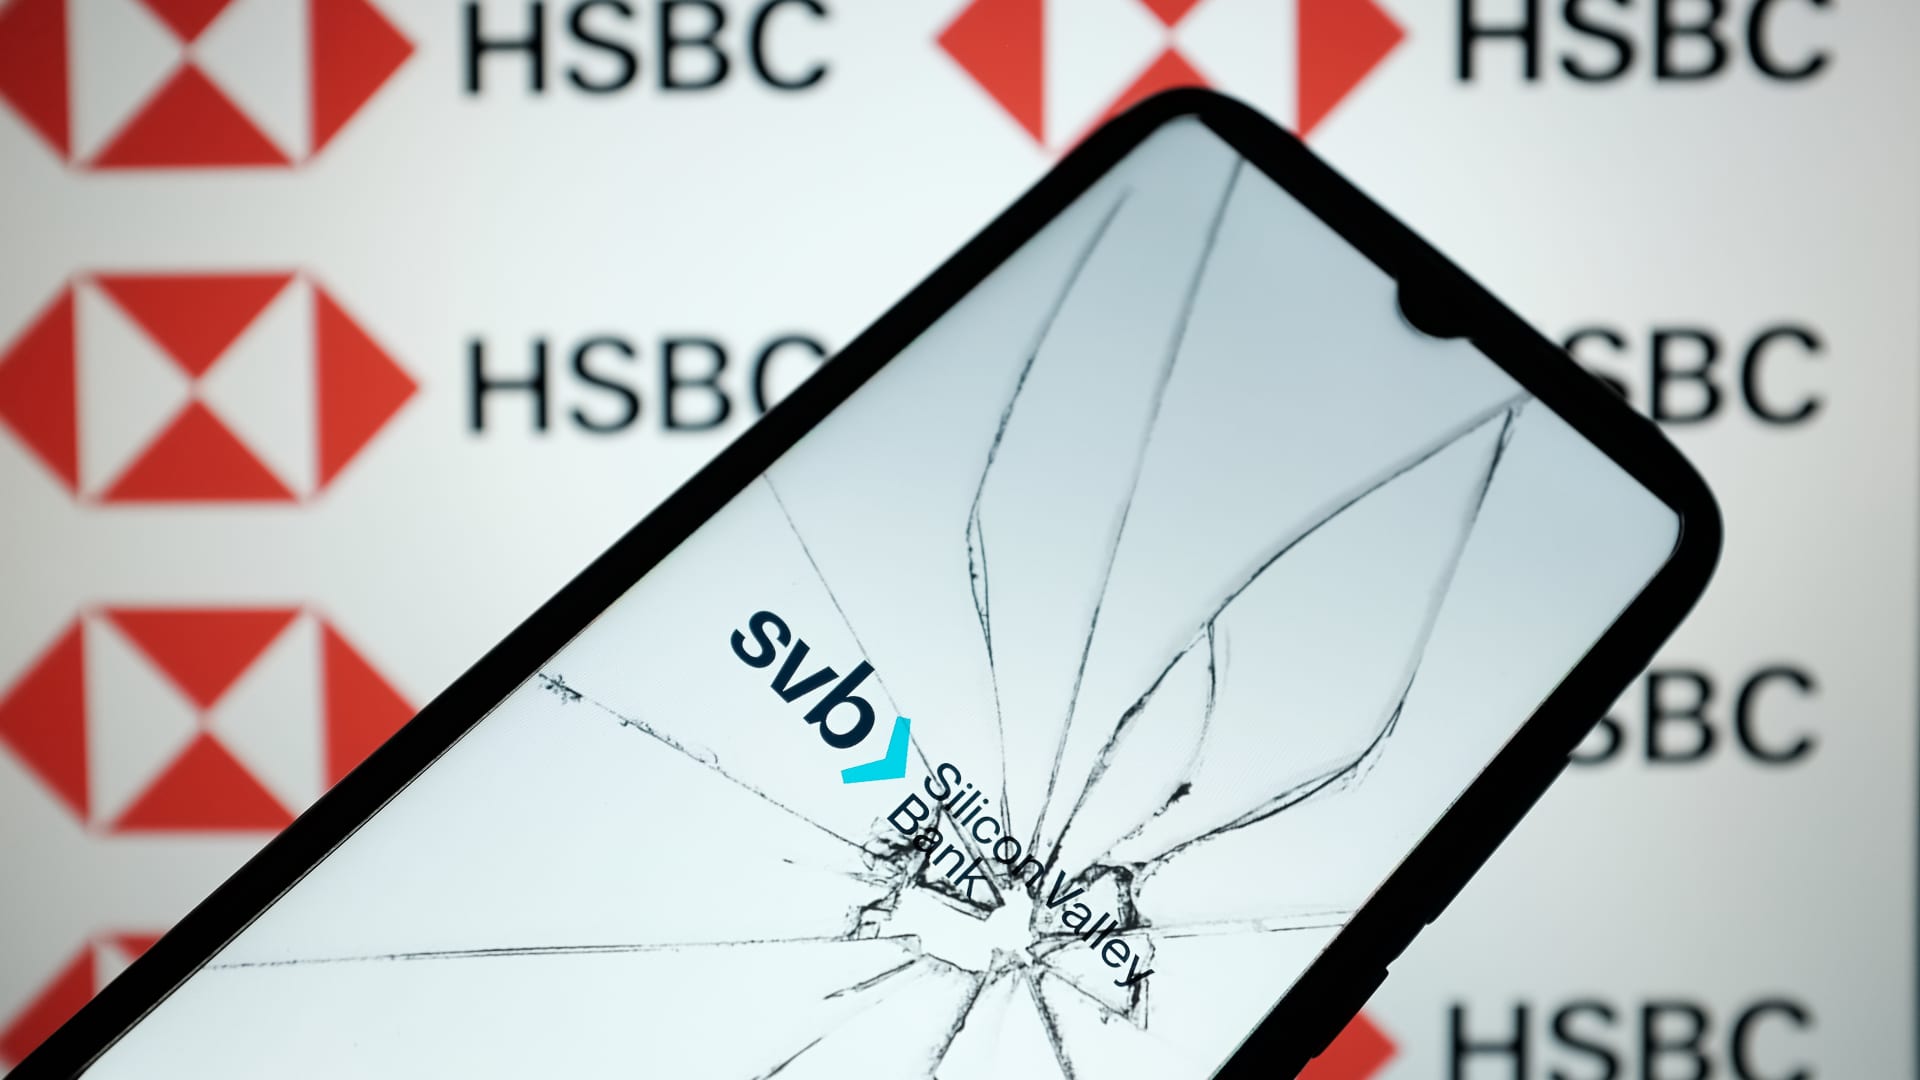 HSBC bought Silicon Valley Bank UK in record time — here’s how events unfolded